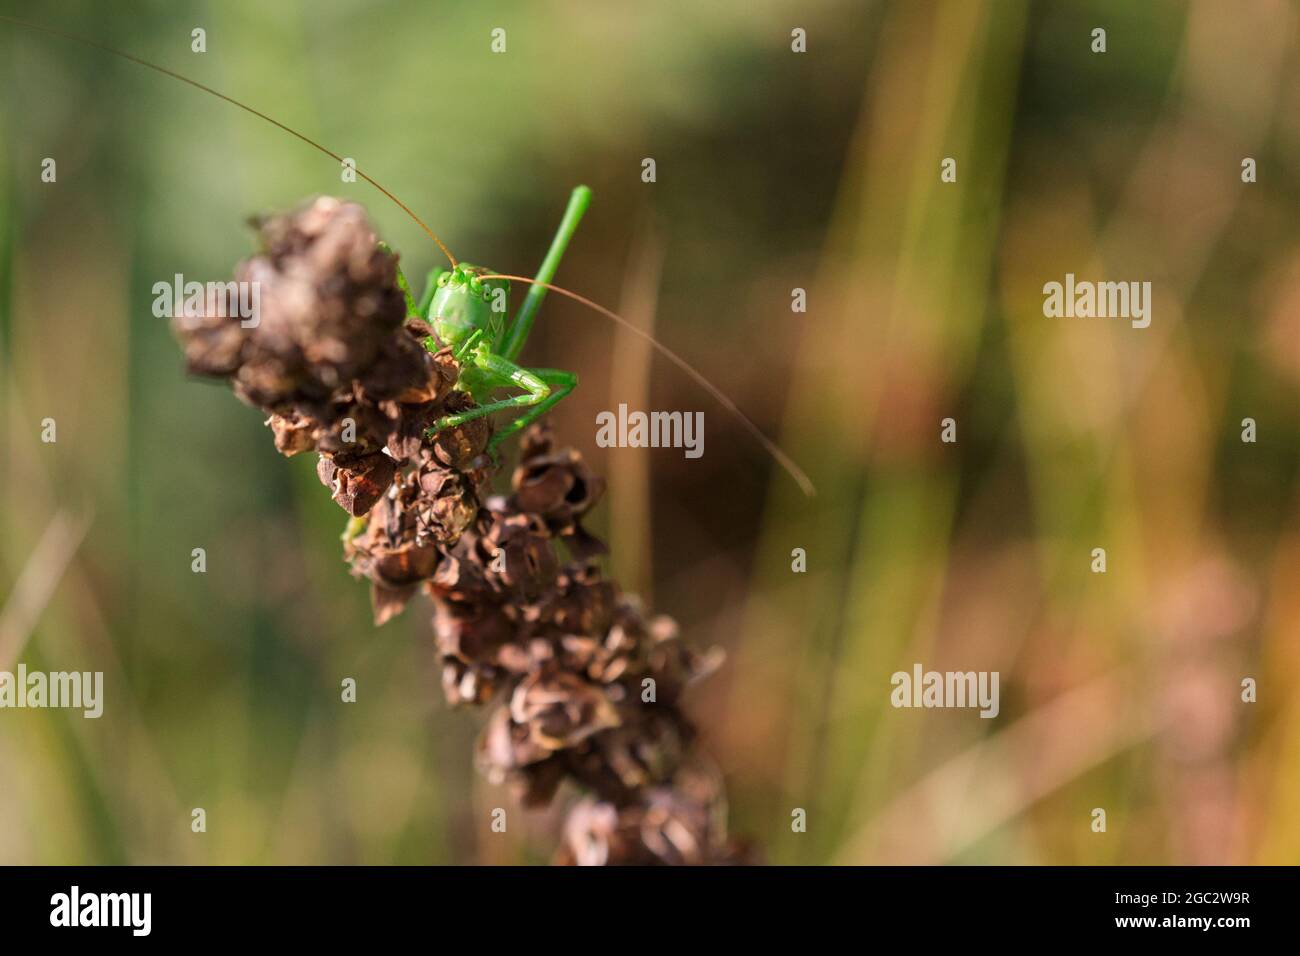 Great green bush cricket (Tettigonia viridissima) sunbathes resting on a plant. The insects seem to enjoy the warmer temperatures and afternoon sunshi Stock Photo